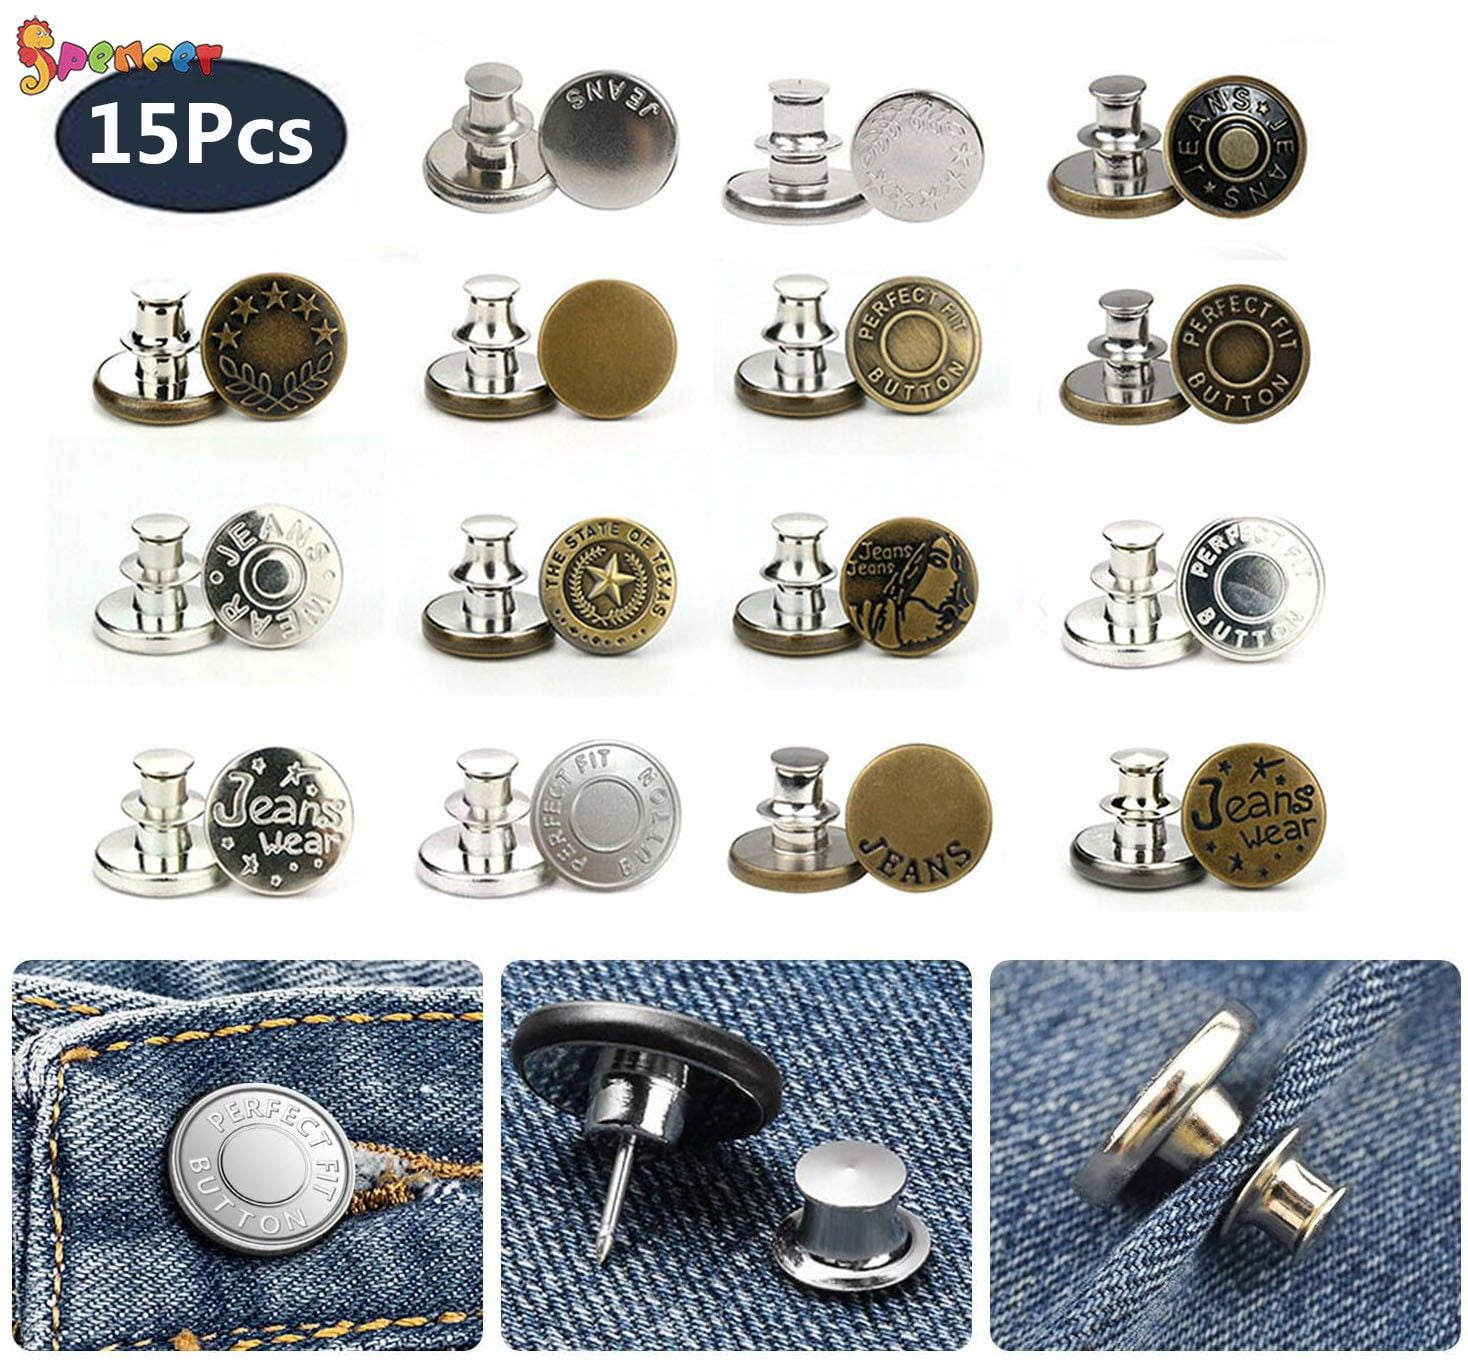 10 Sets Screw Jeans Buttonsmetal Jeans Tacks Metal Jeans Button No-sew  Nailless Removable Jean Buttons Repair Kit Rivets for Jeans Jackets 